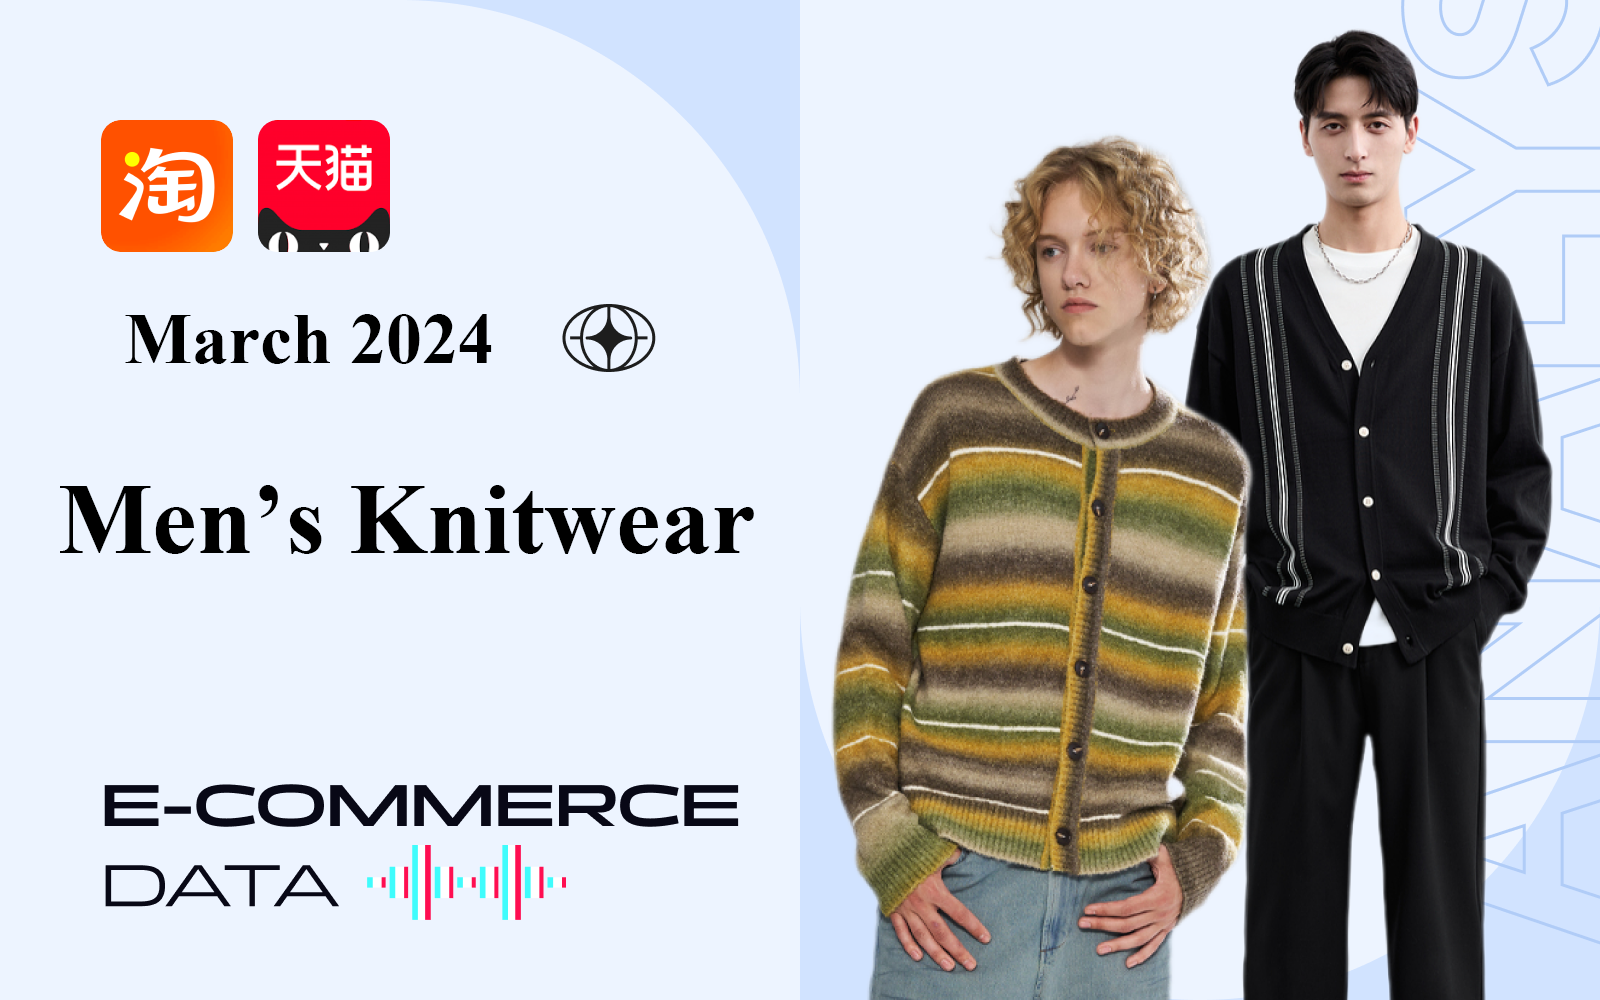 Sweaters -- The Data Analysis of E-Commerce Menswear